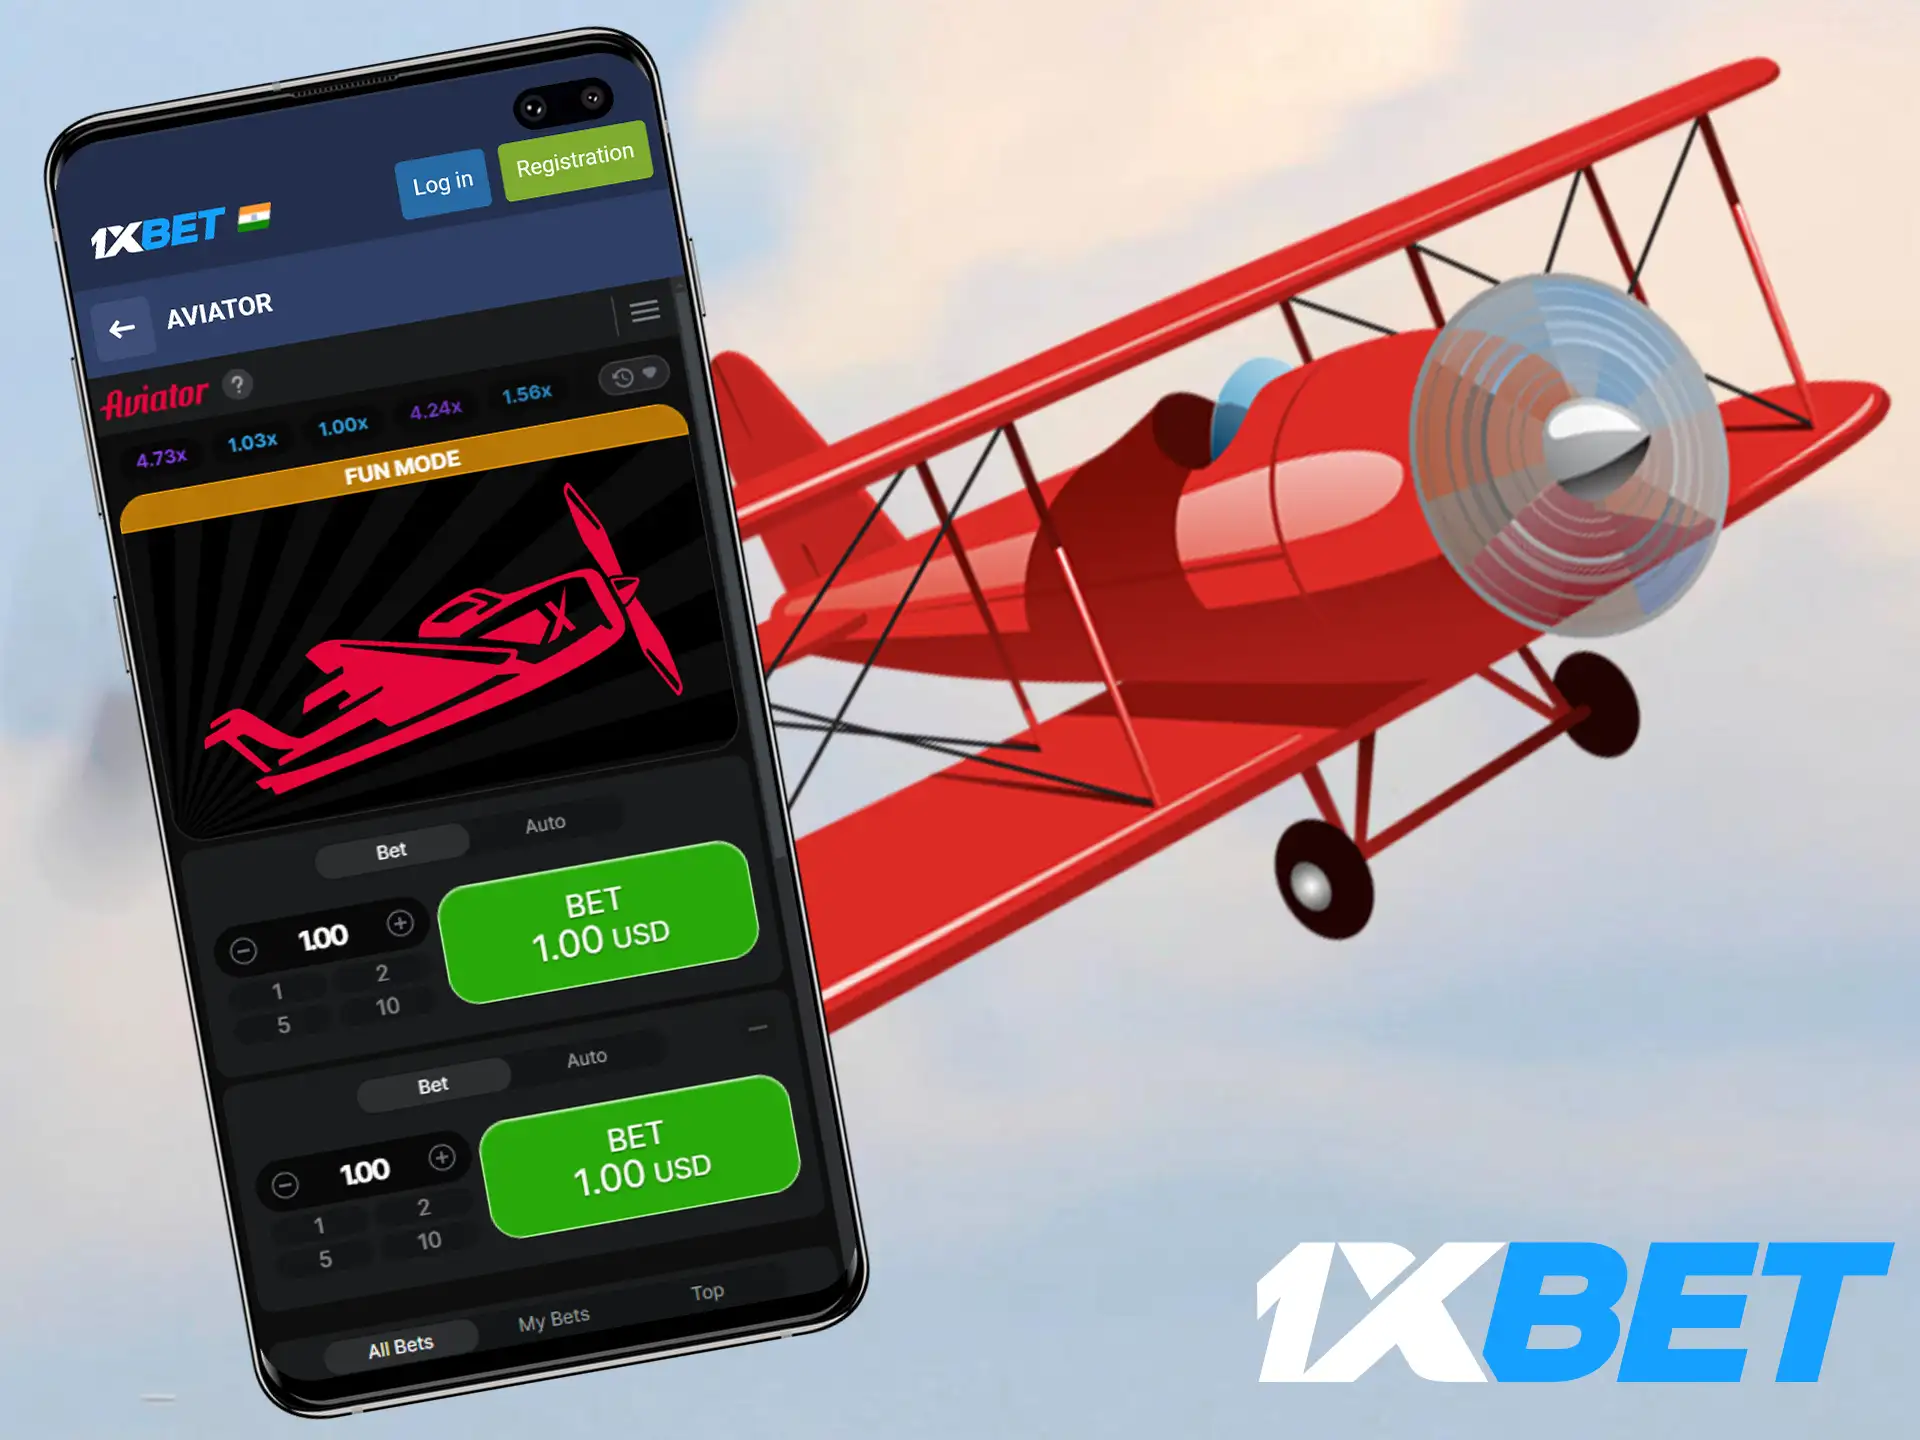 Test your luck and strategy in Aviator game at 1xBet.